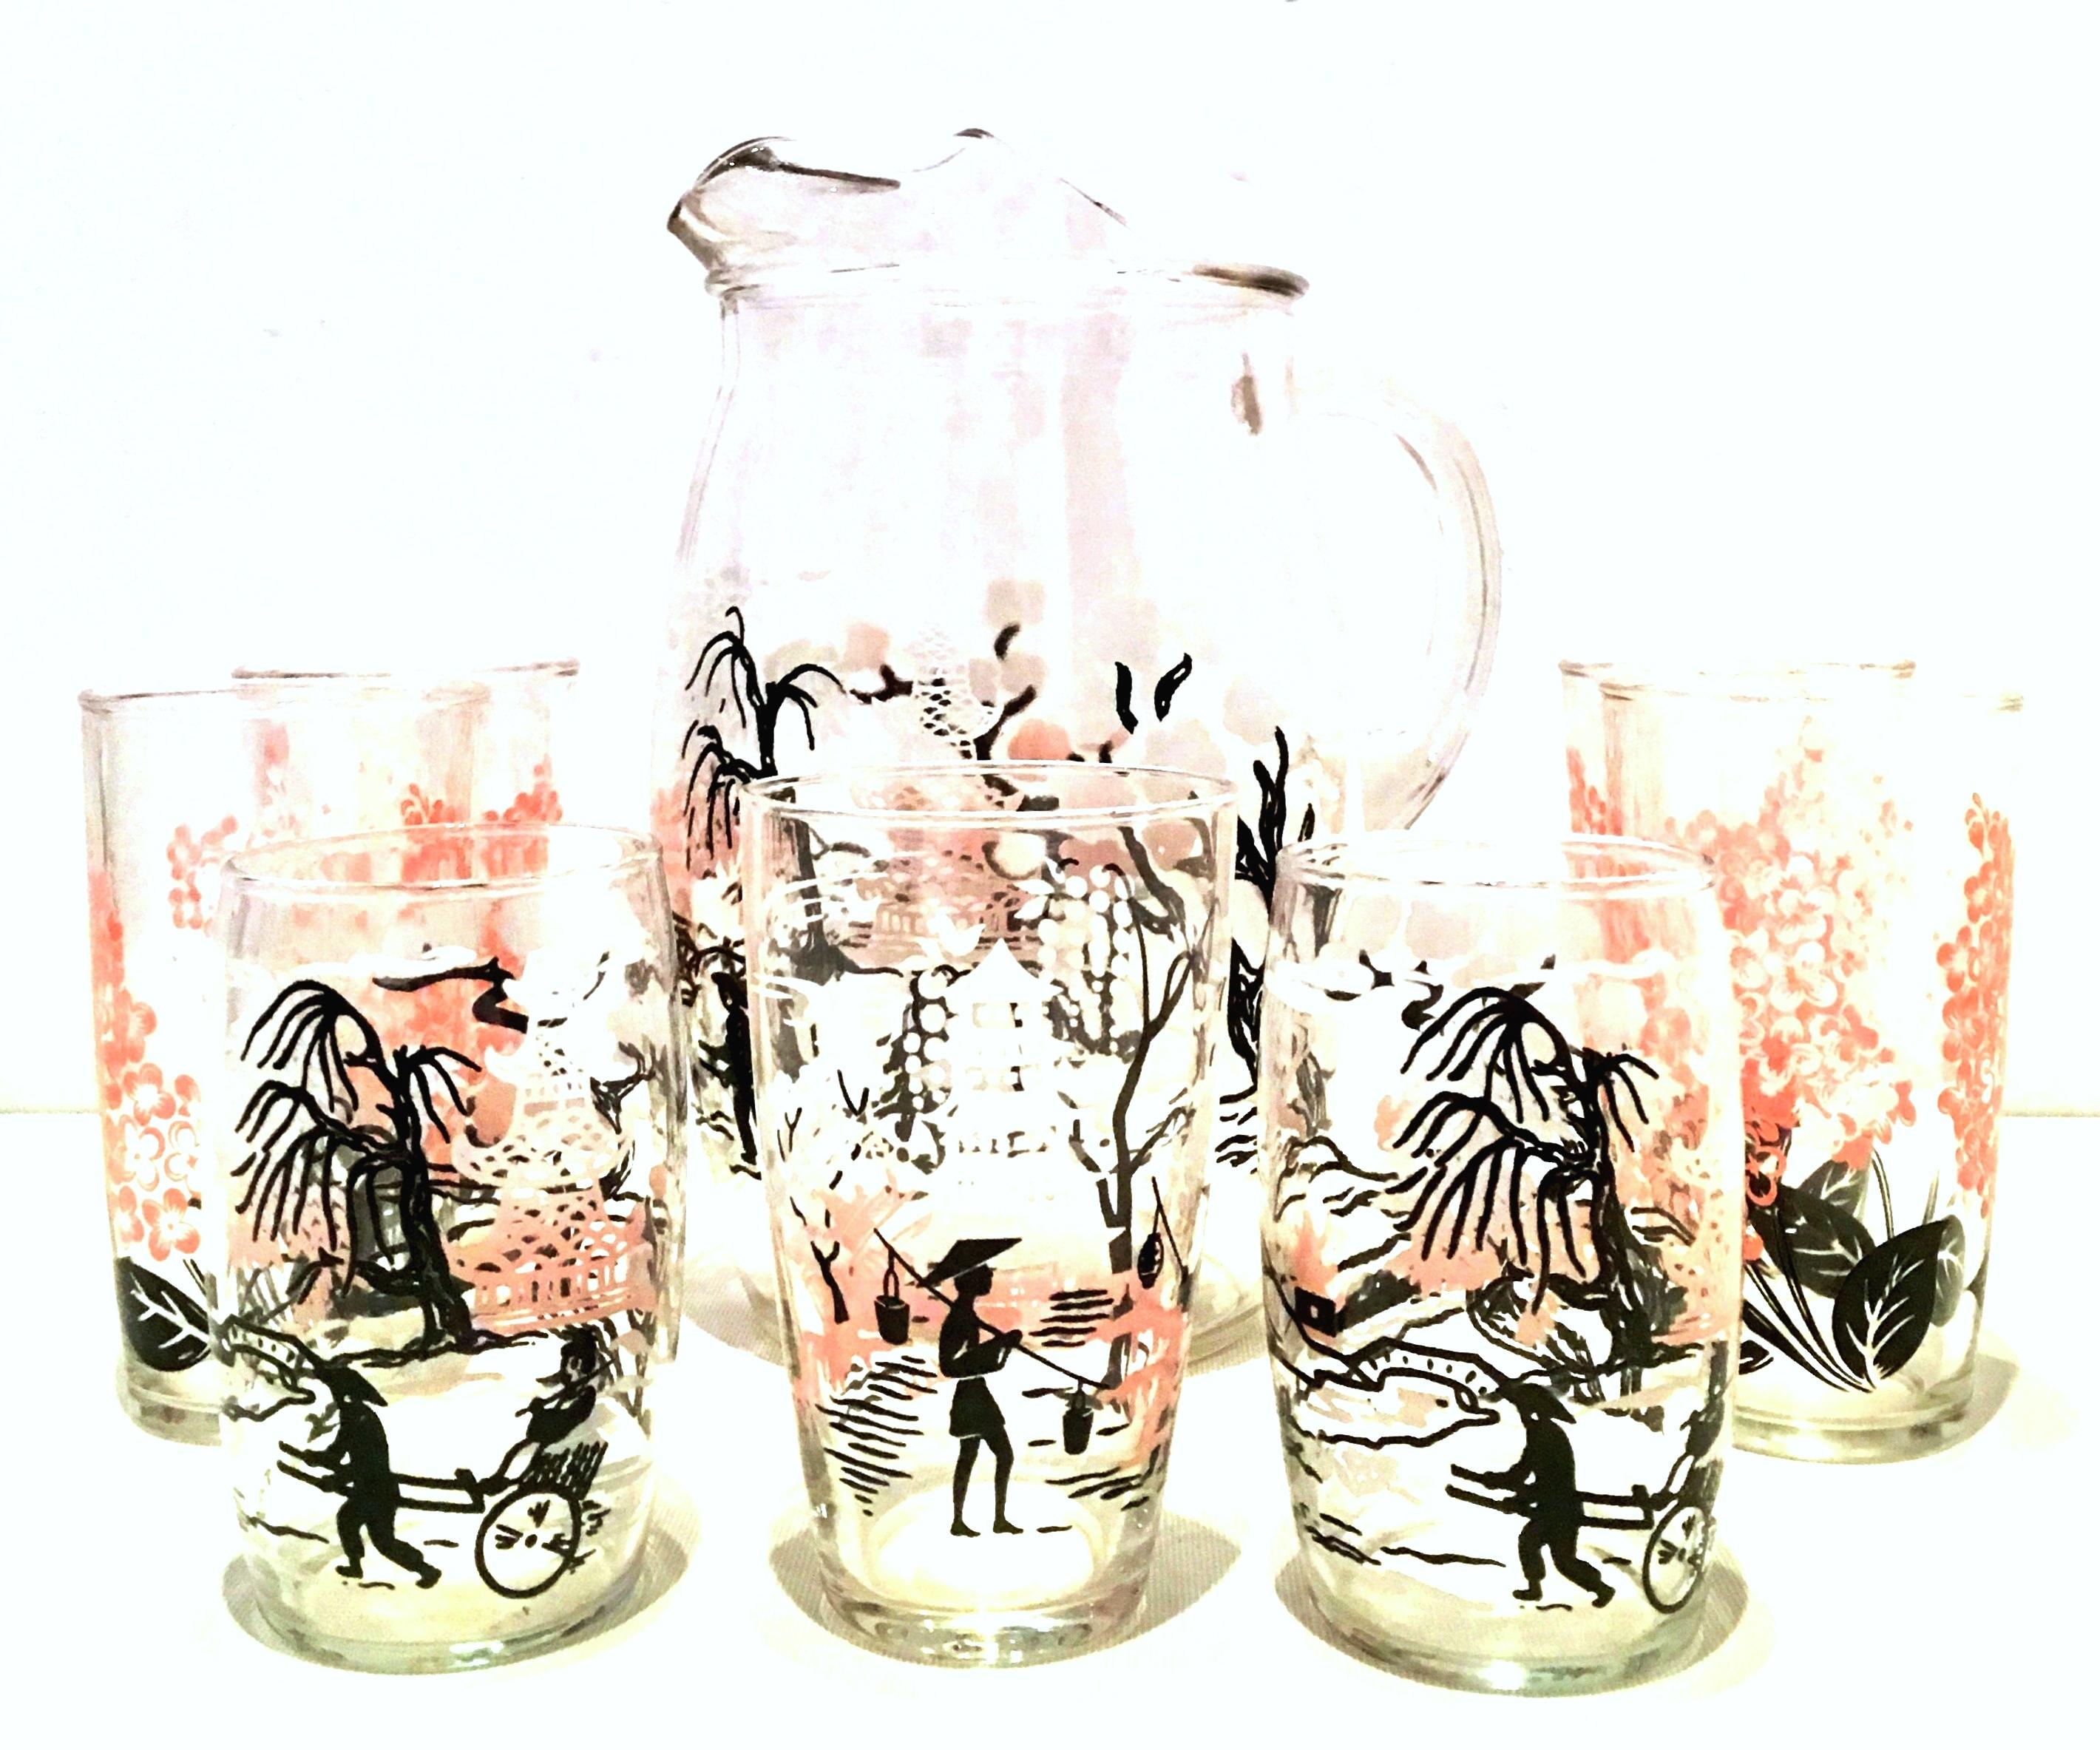 20th Century chinoiserie style printed drinks set of eight pieces. Features a pink, white and black Asian theme motif. Set included one handled pitcher and 7 tumblers.
Set includes three sized tumblers.
Four tall tumblers: 5